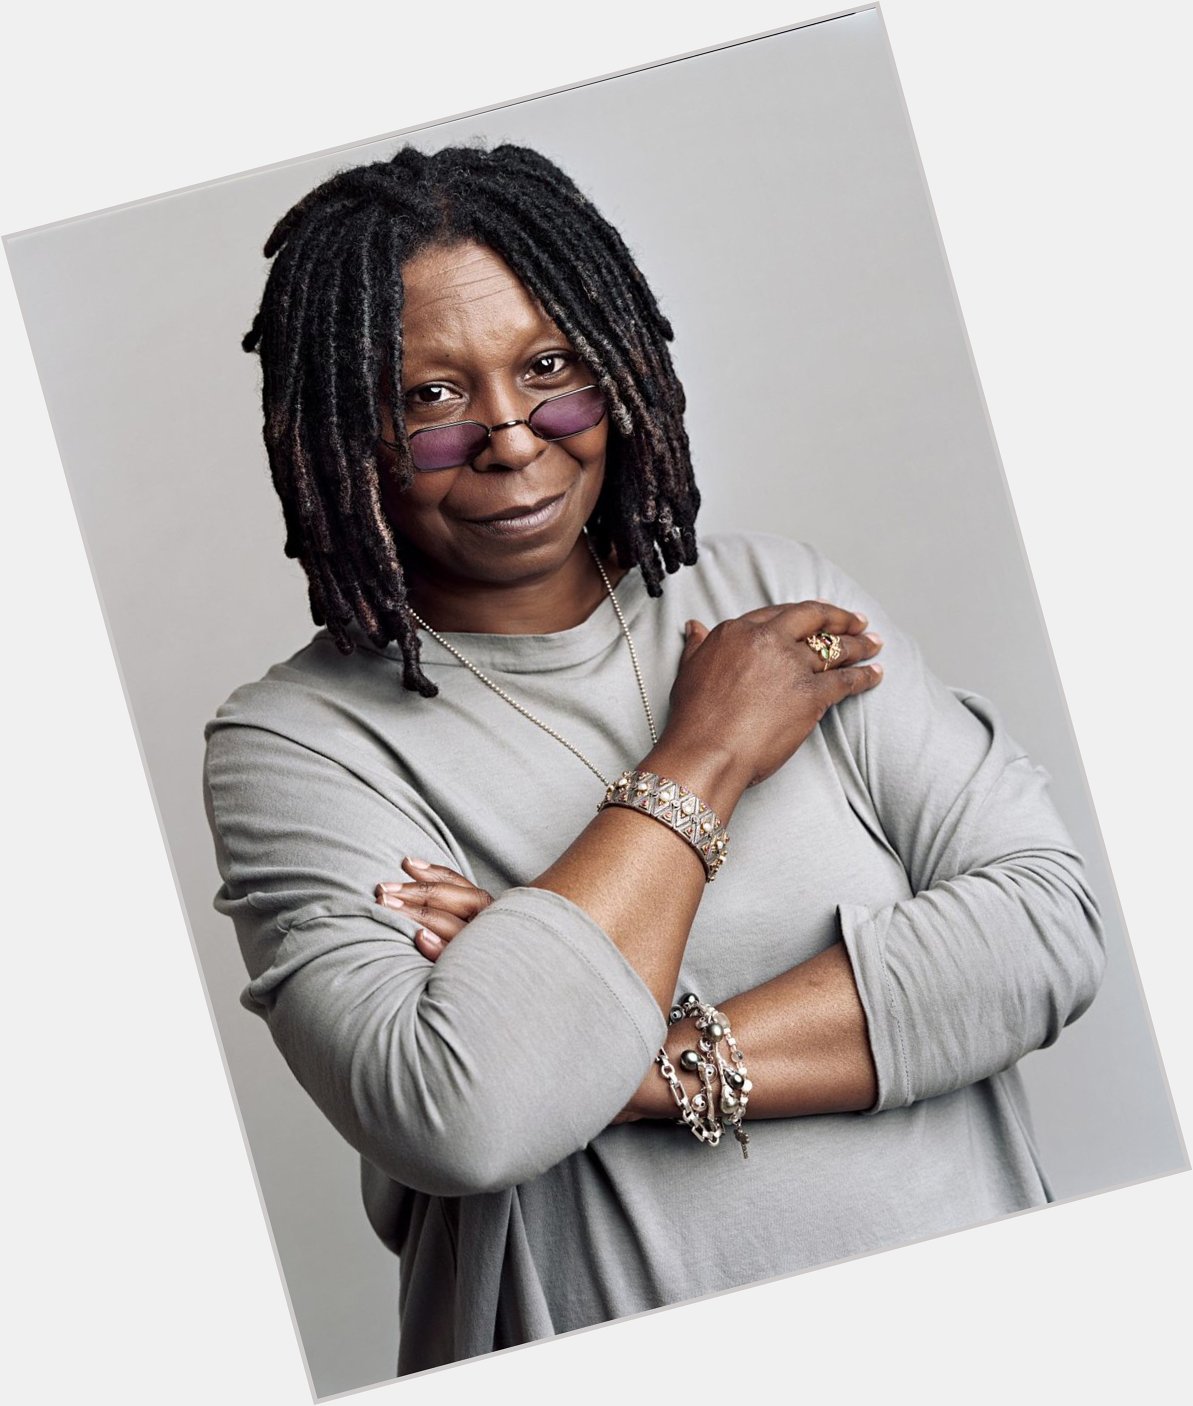 HAPPY BIRTHDAY: is celebrating today! Whats your favorite Whoopi Goldberg movie? 